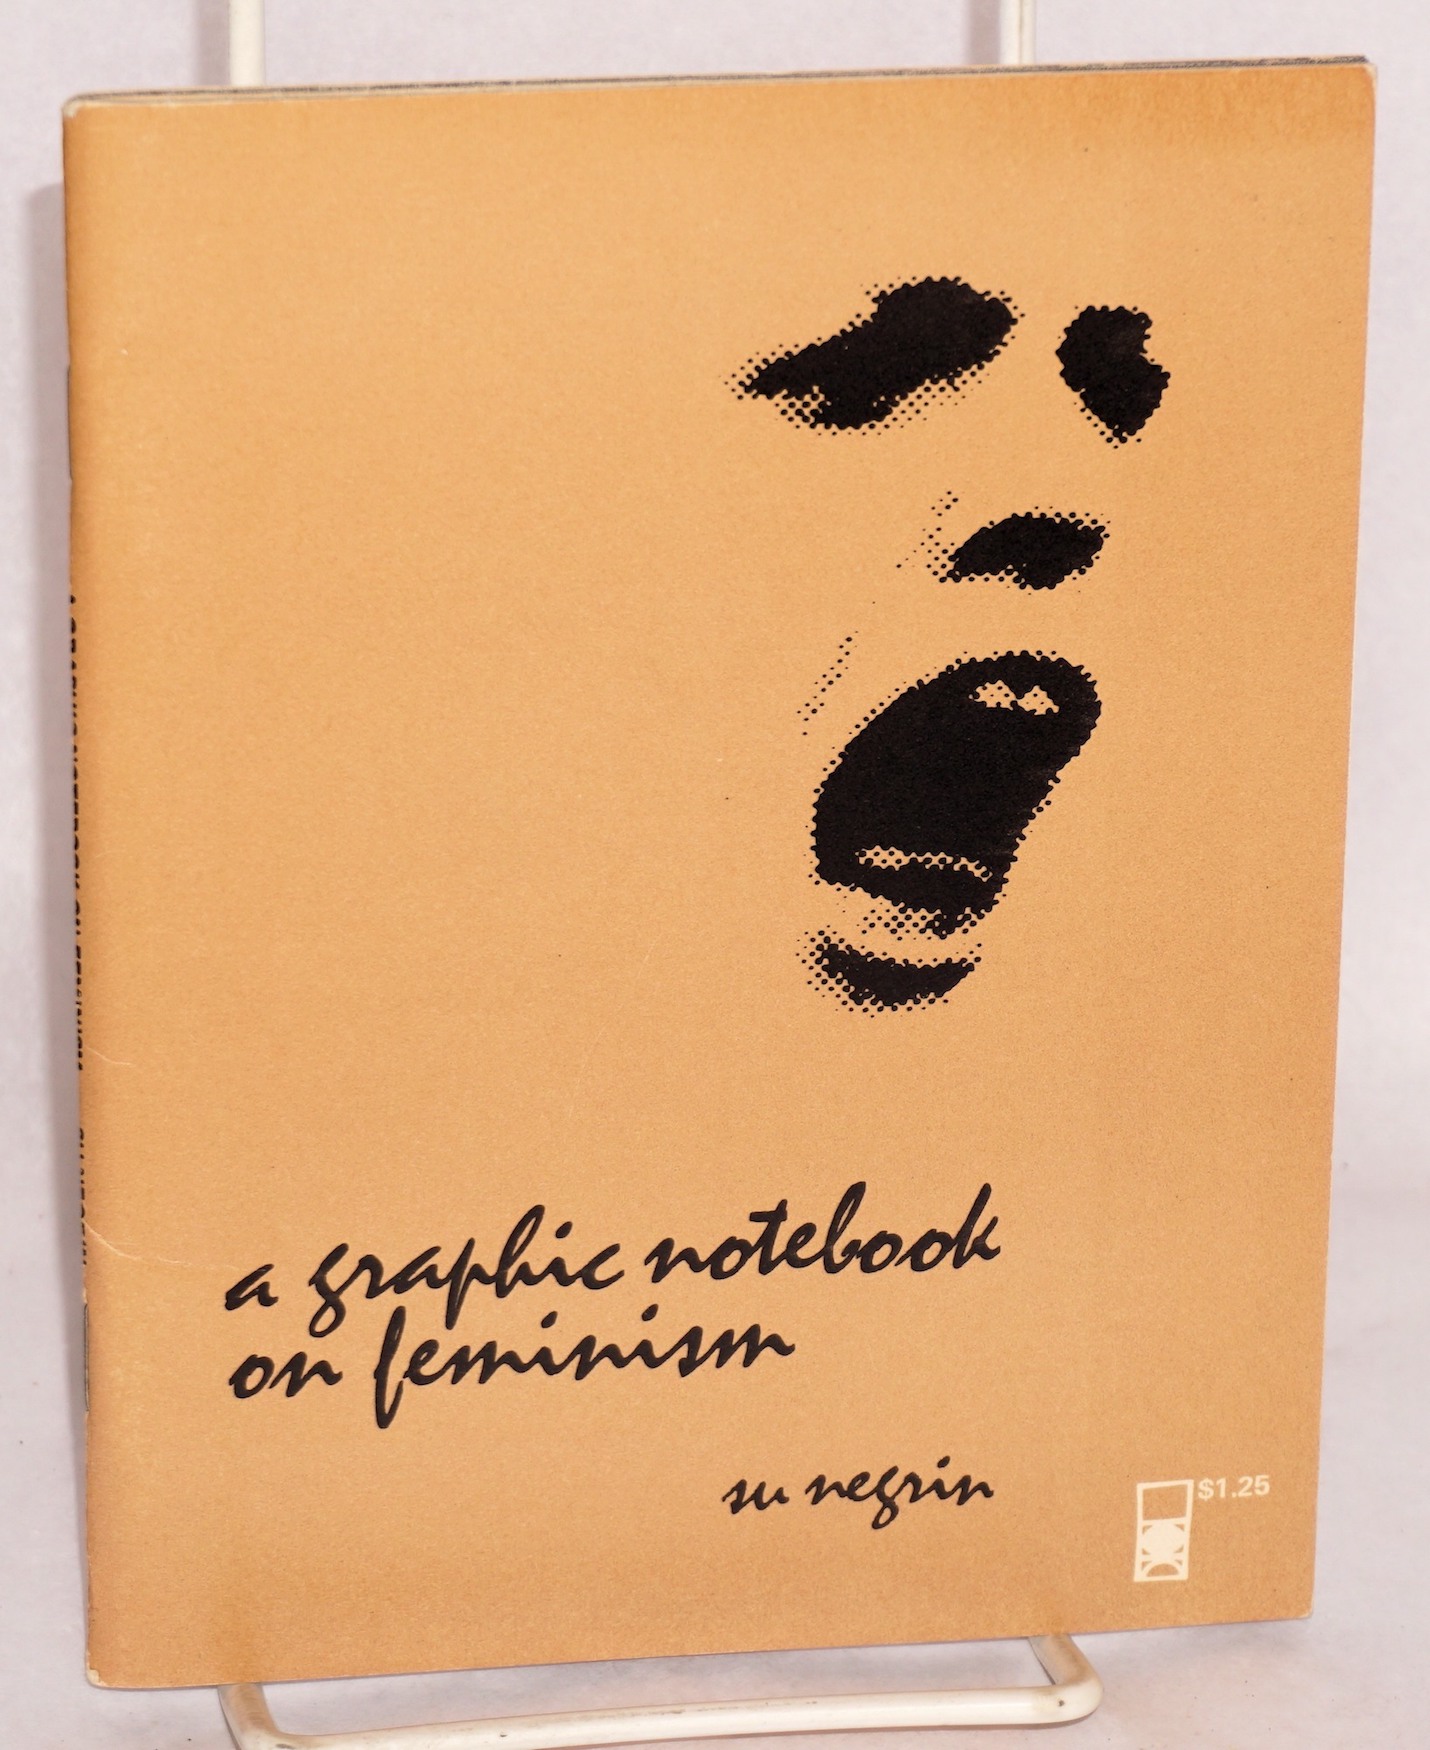  Su Negrin, A Graphic Notebook on Feminism, 1970. 